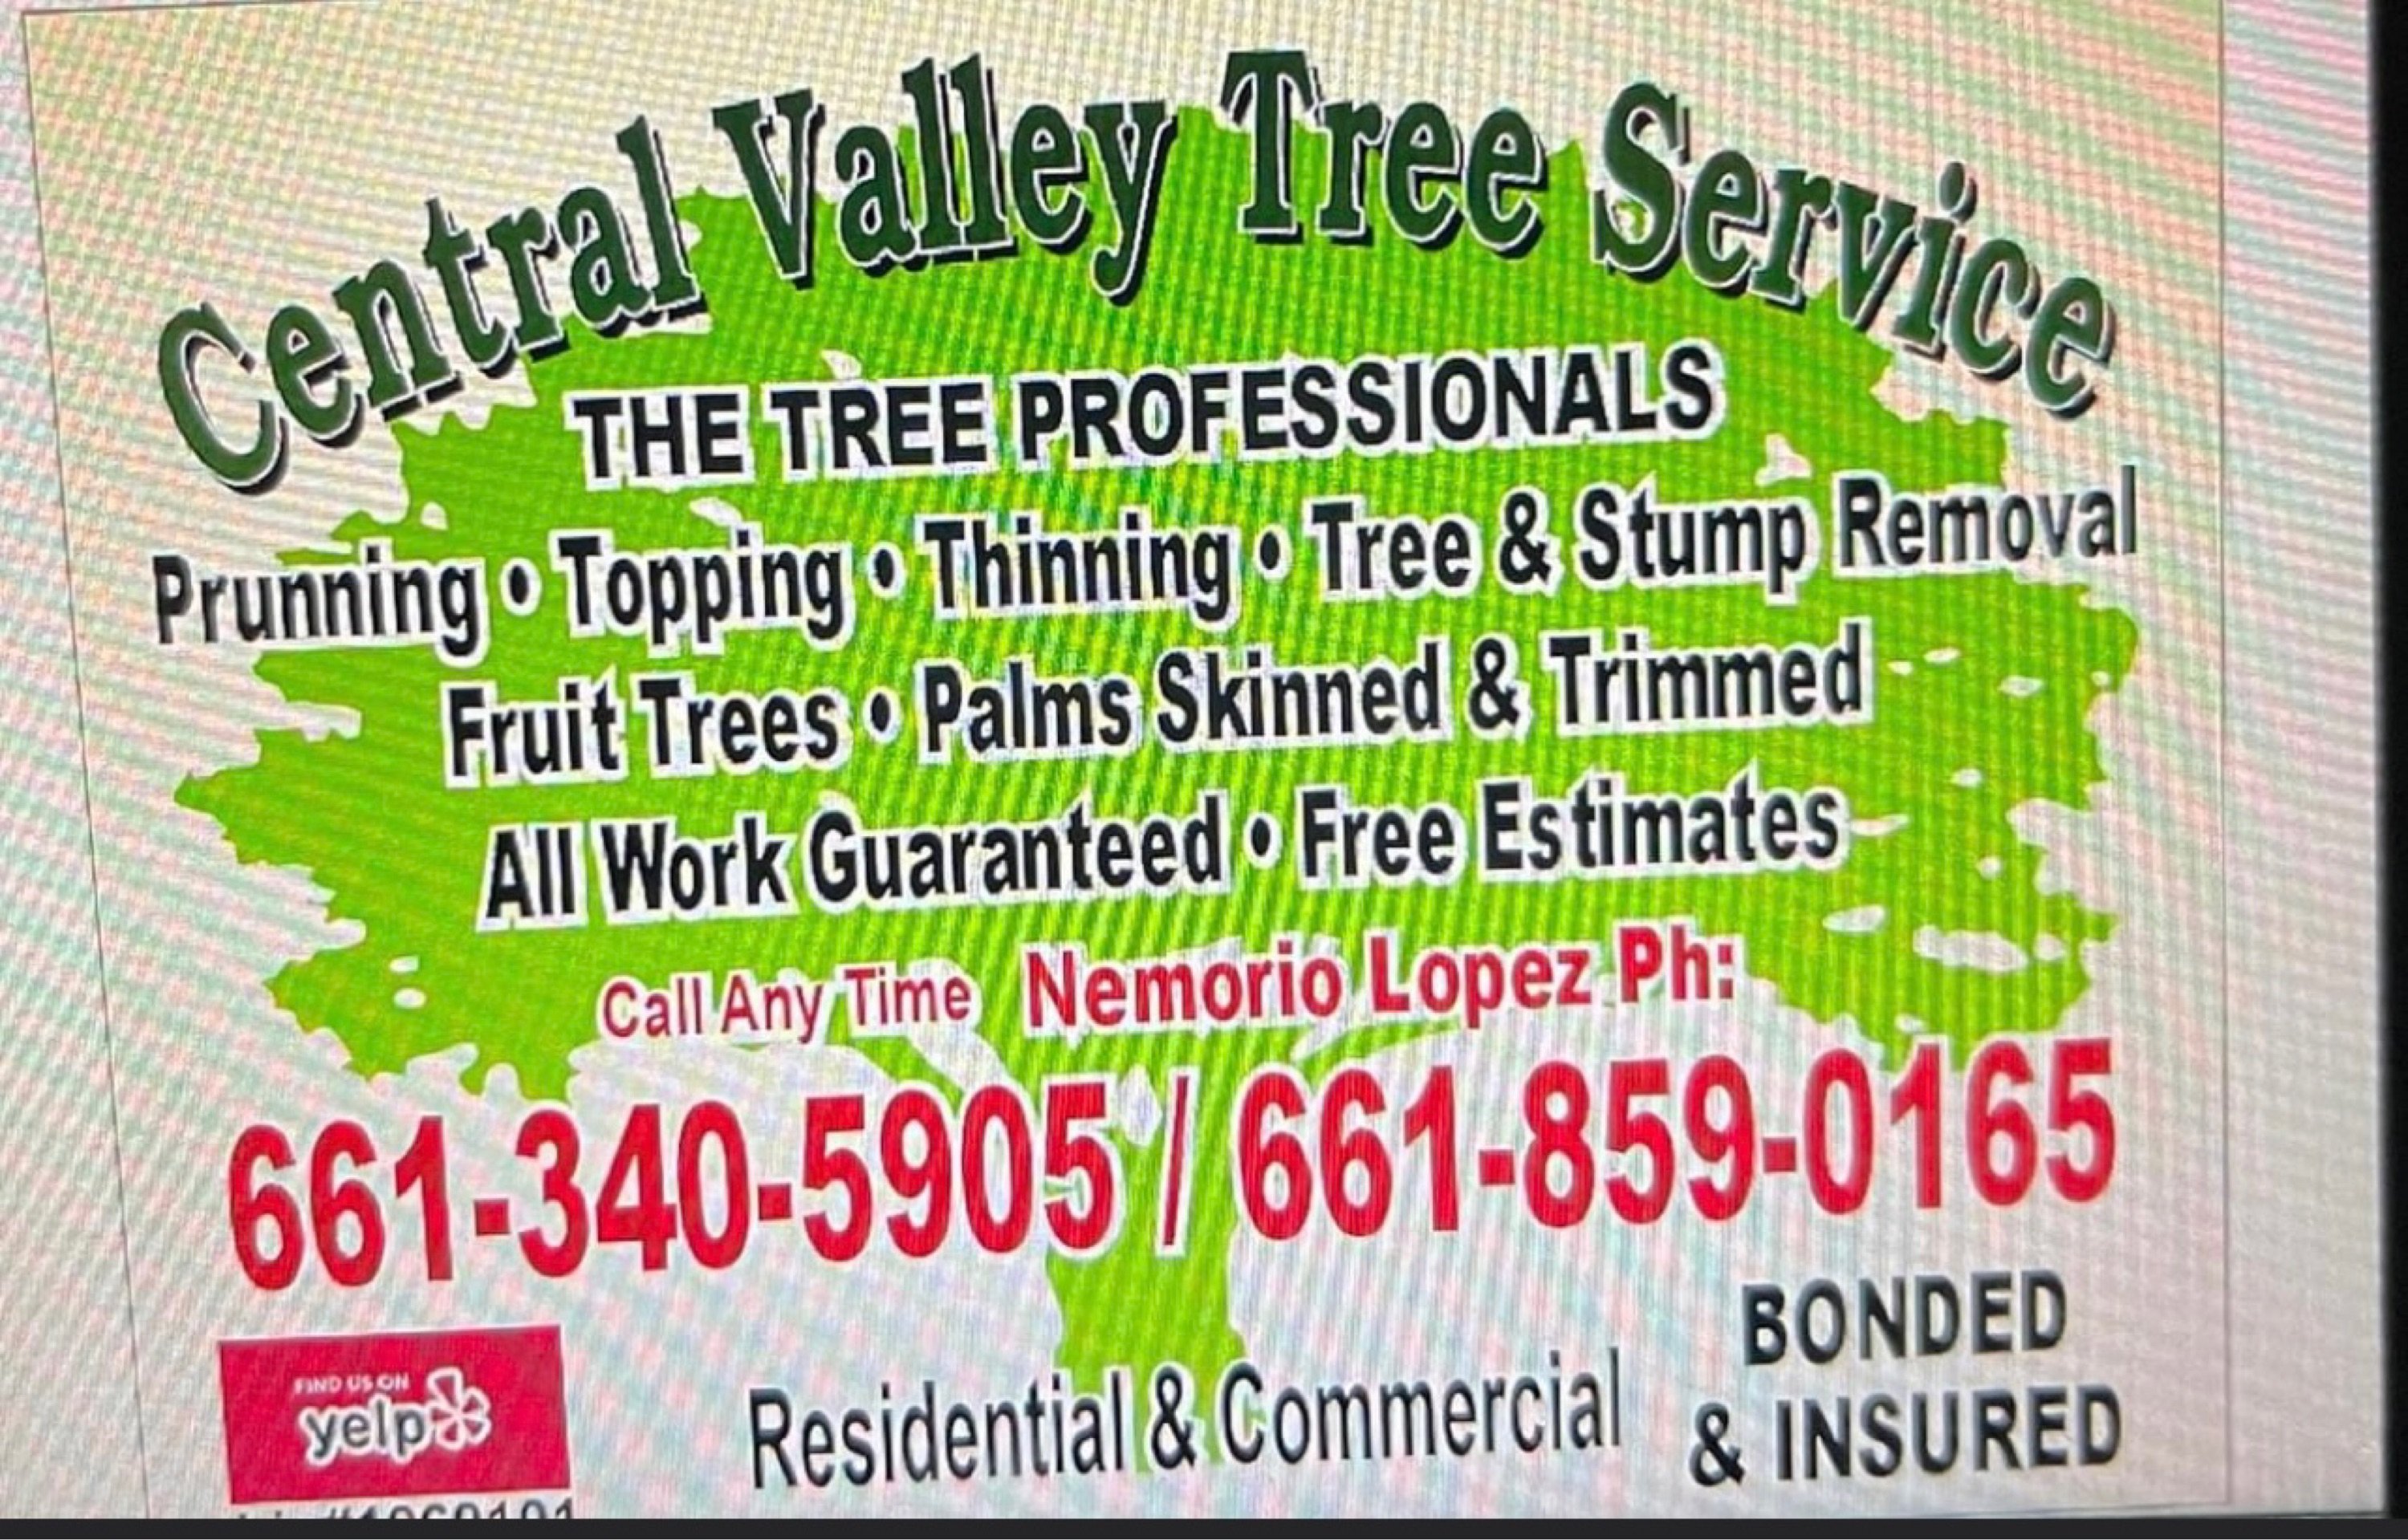 Central Valley Tree Services Logo